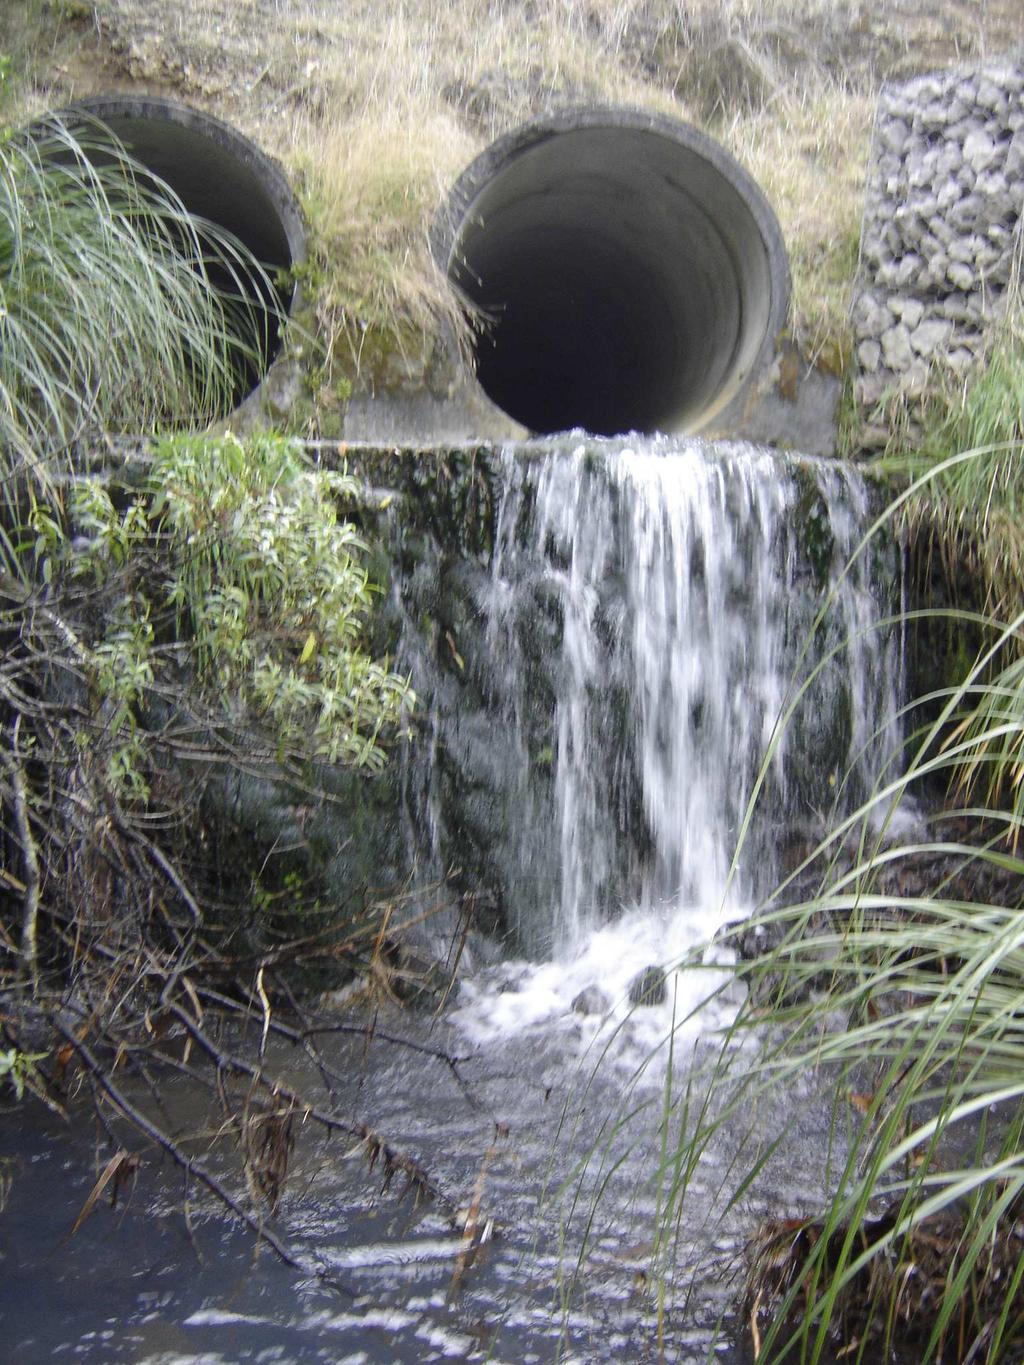 Culverts may also be square bottomed as against circular, thereby minimising water depth compared with a circular design.